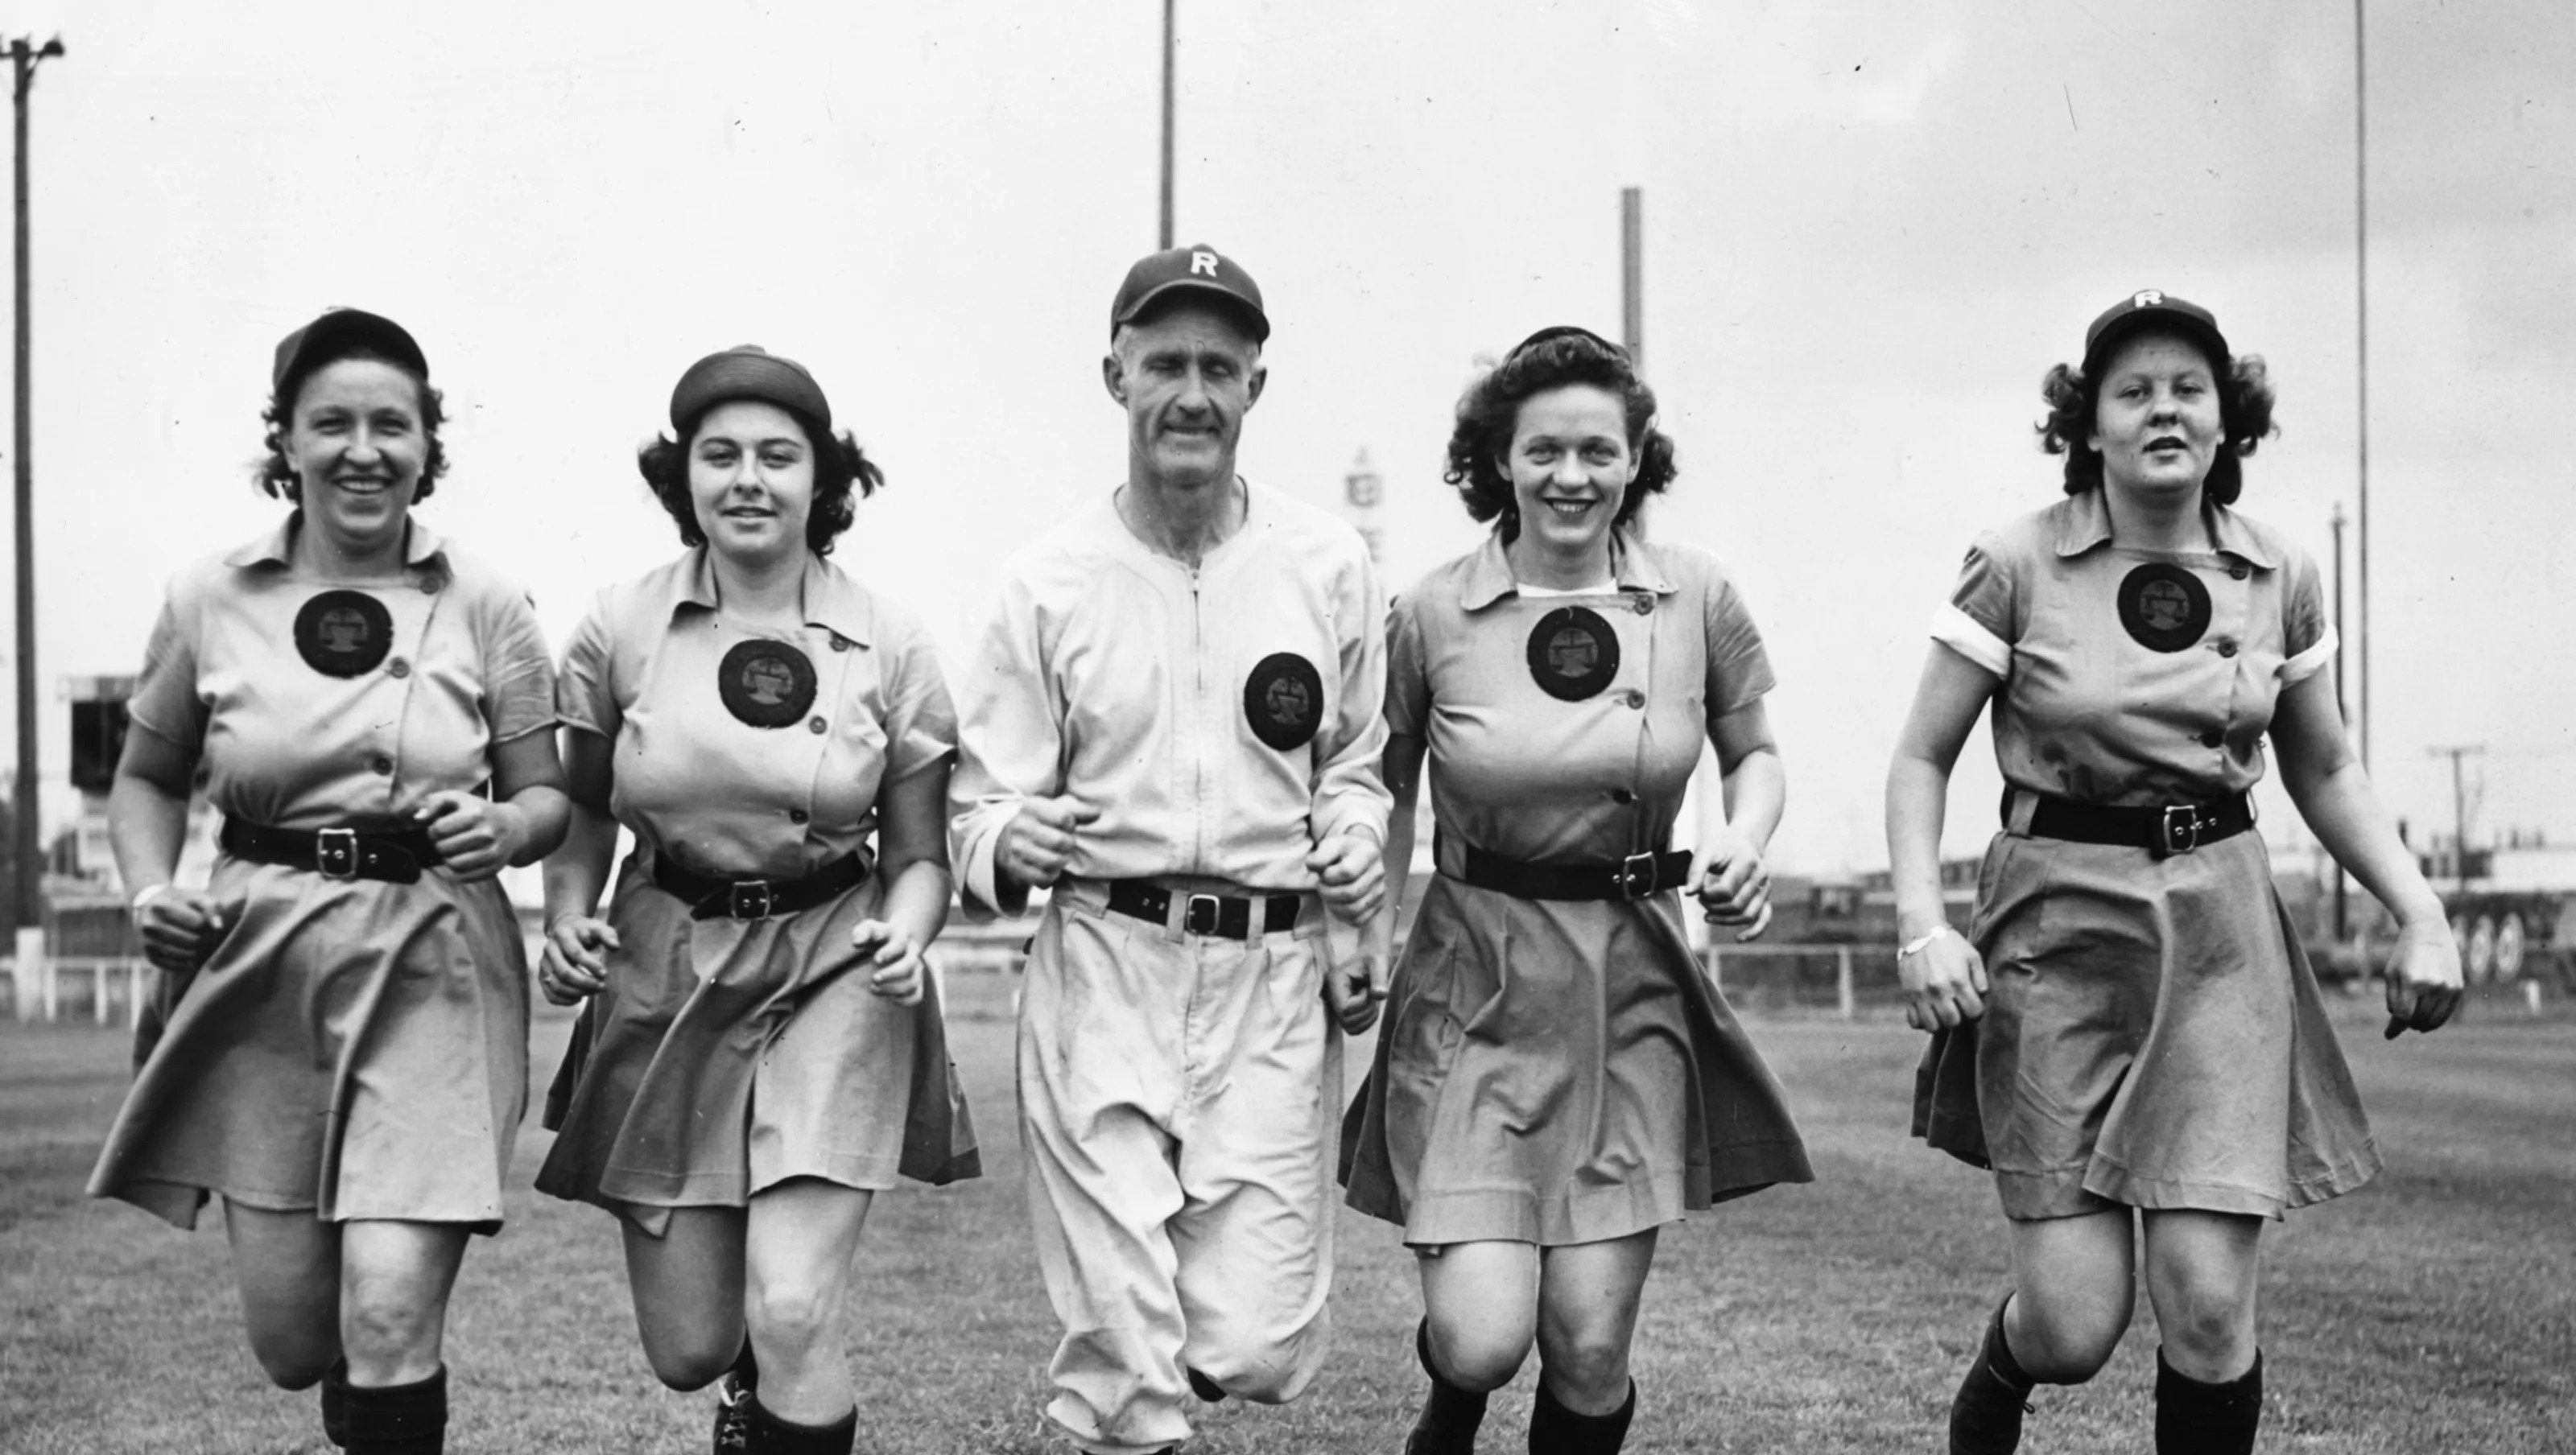 A League of Their Own,' Rockford Peaches revisited in new TV series